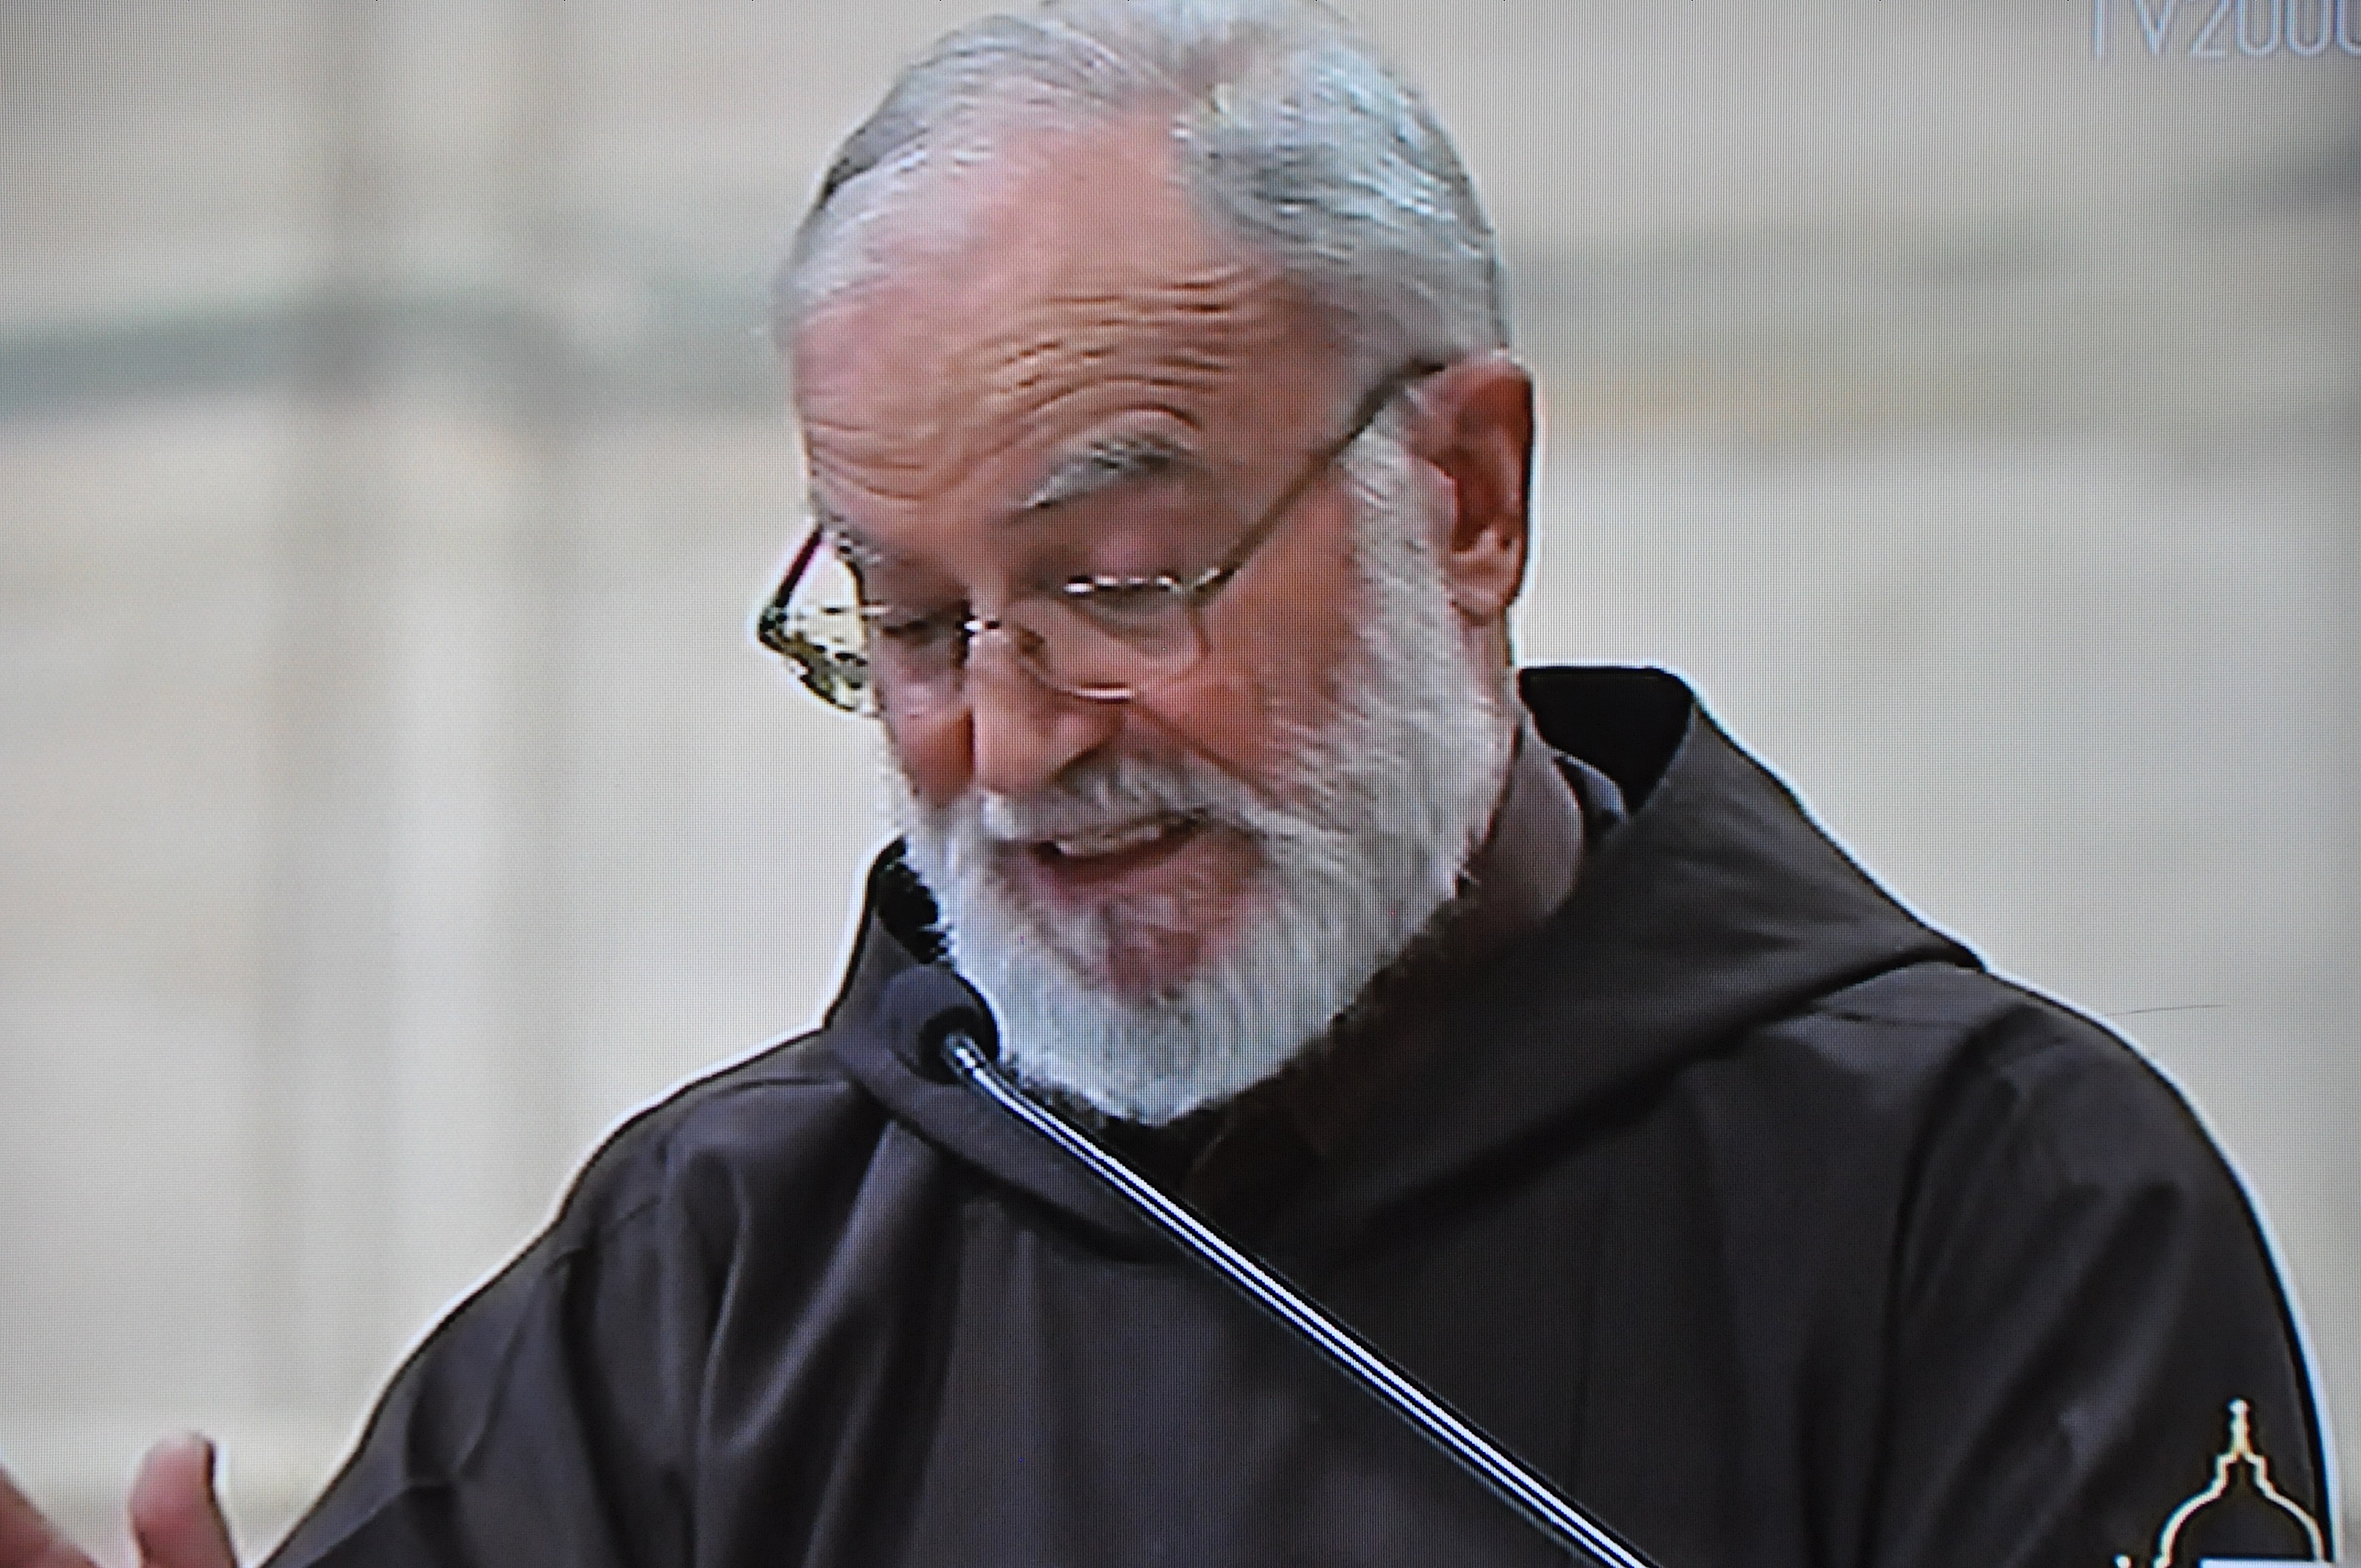 Father Raniero Cantalamessa during the World Day of Prayer for the care of creation